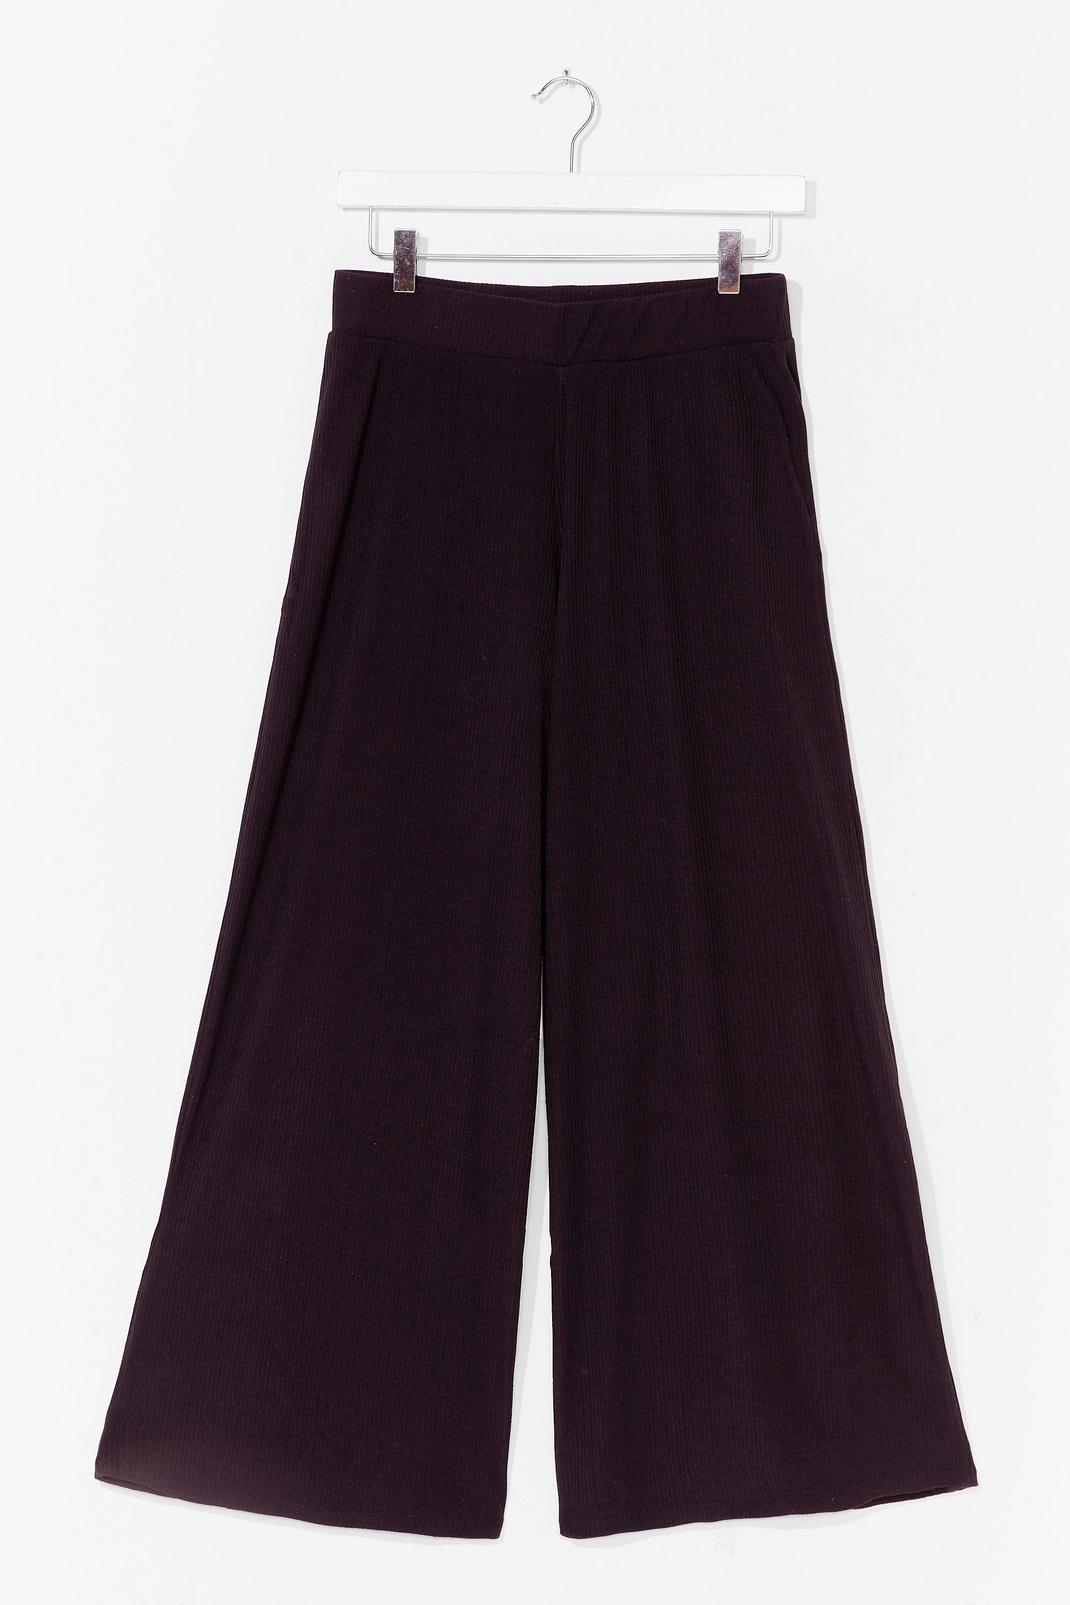 We Love You Culotte Wide-Leg Pants image number 1